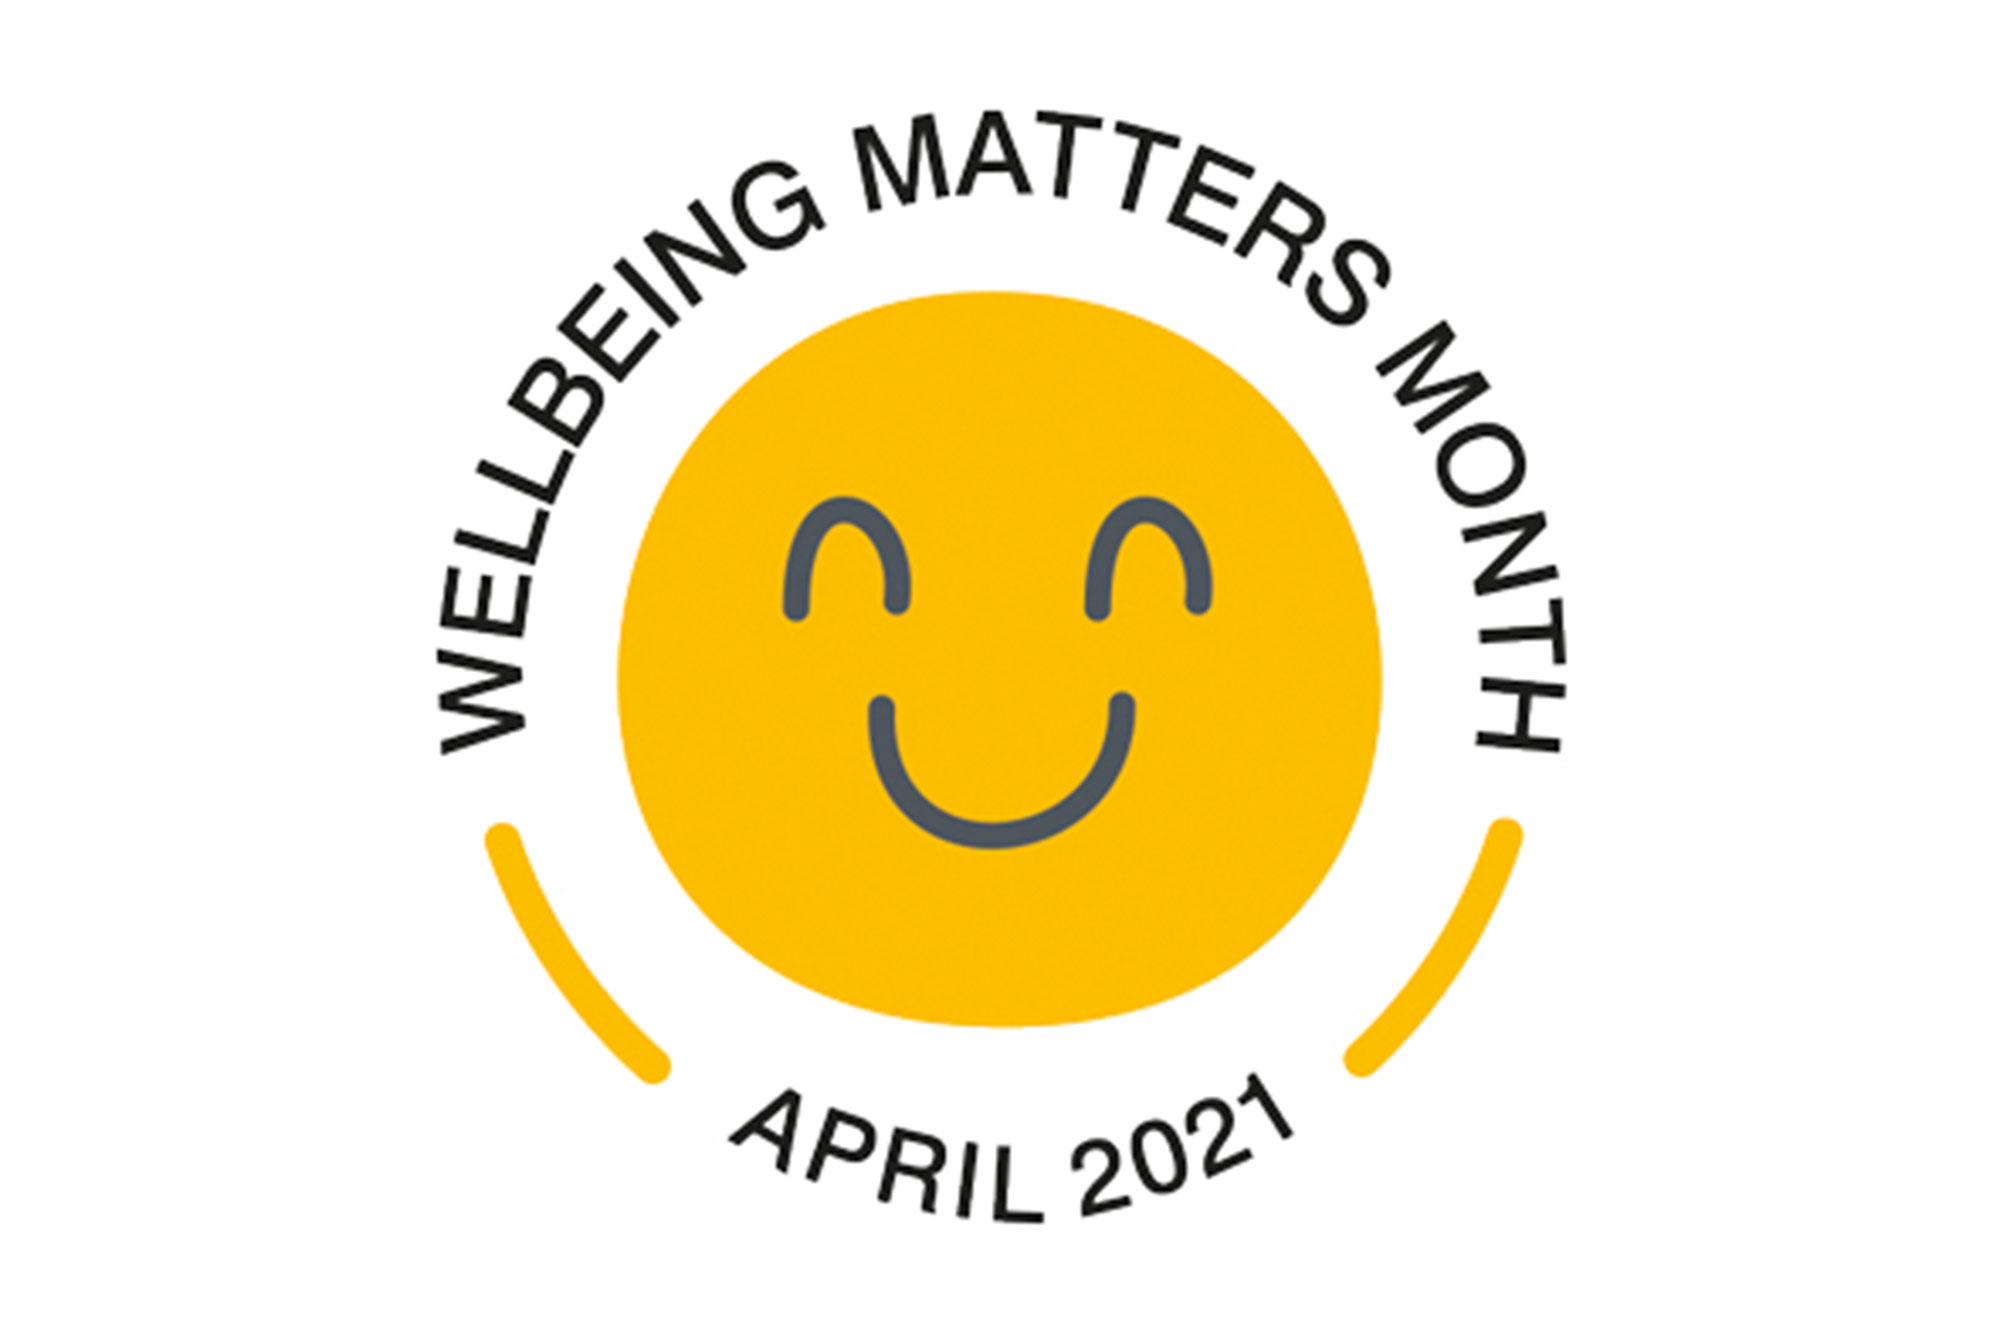 wellbeing matters